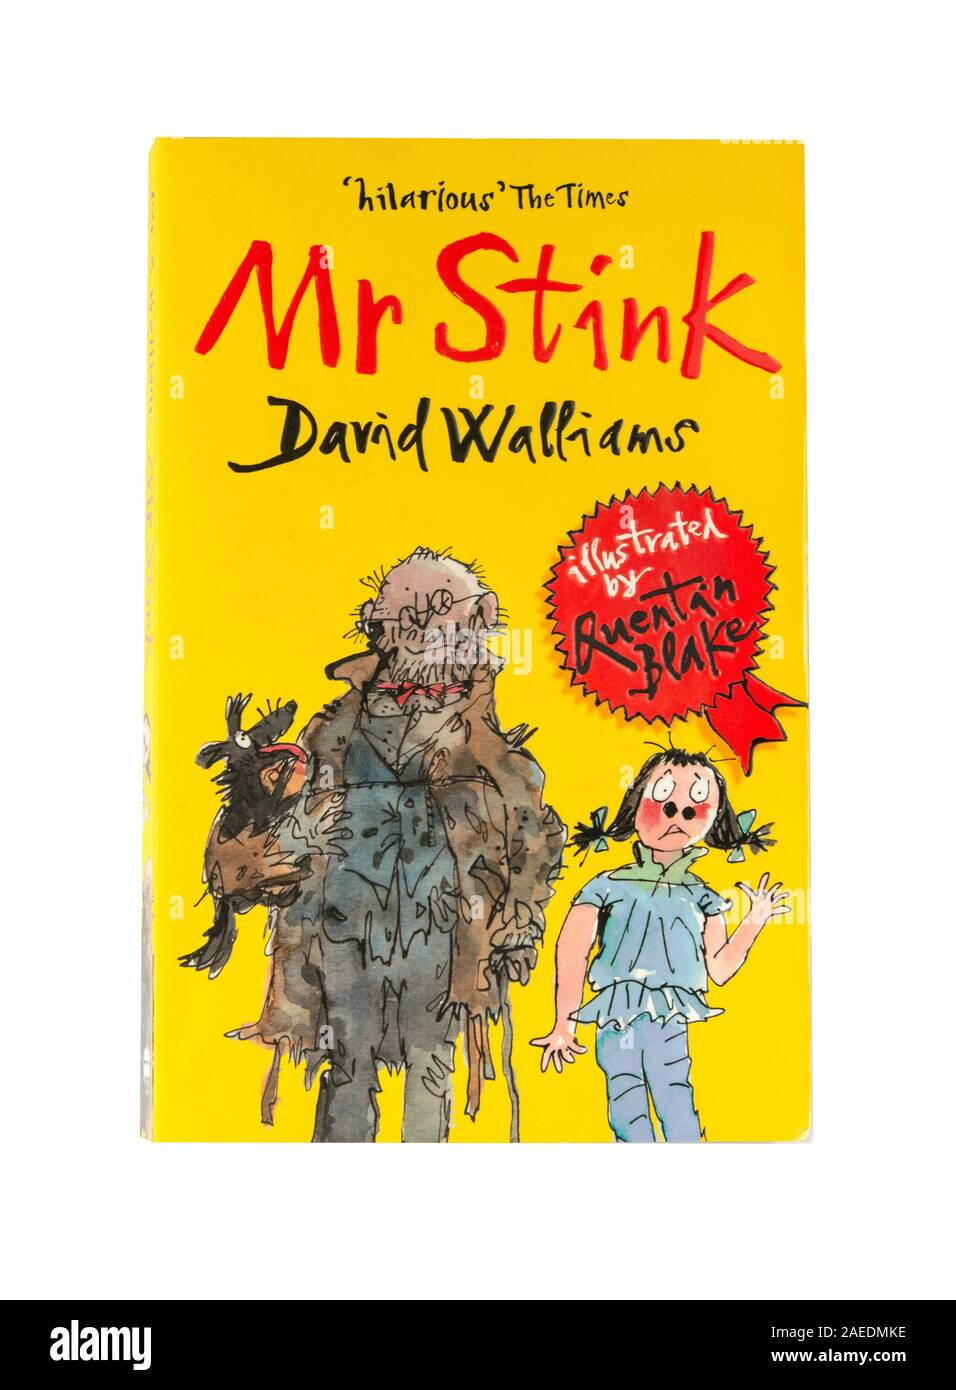 David Walliams 'Mr Stink' children's book, Greater London, Angleterre, Royaume-Uni Banque D'Images